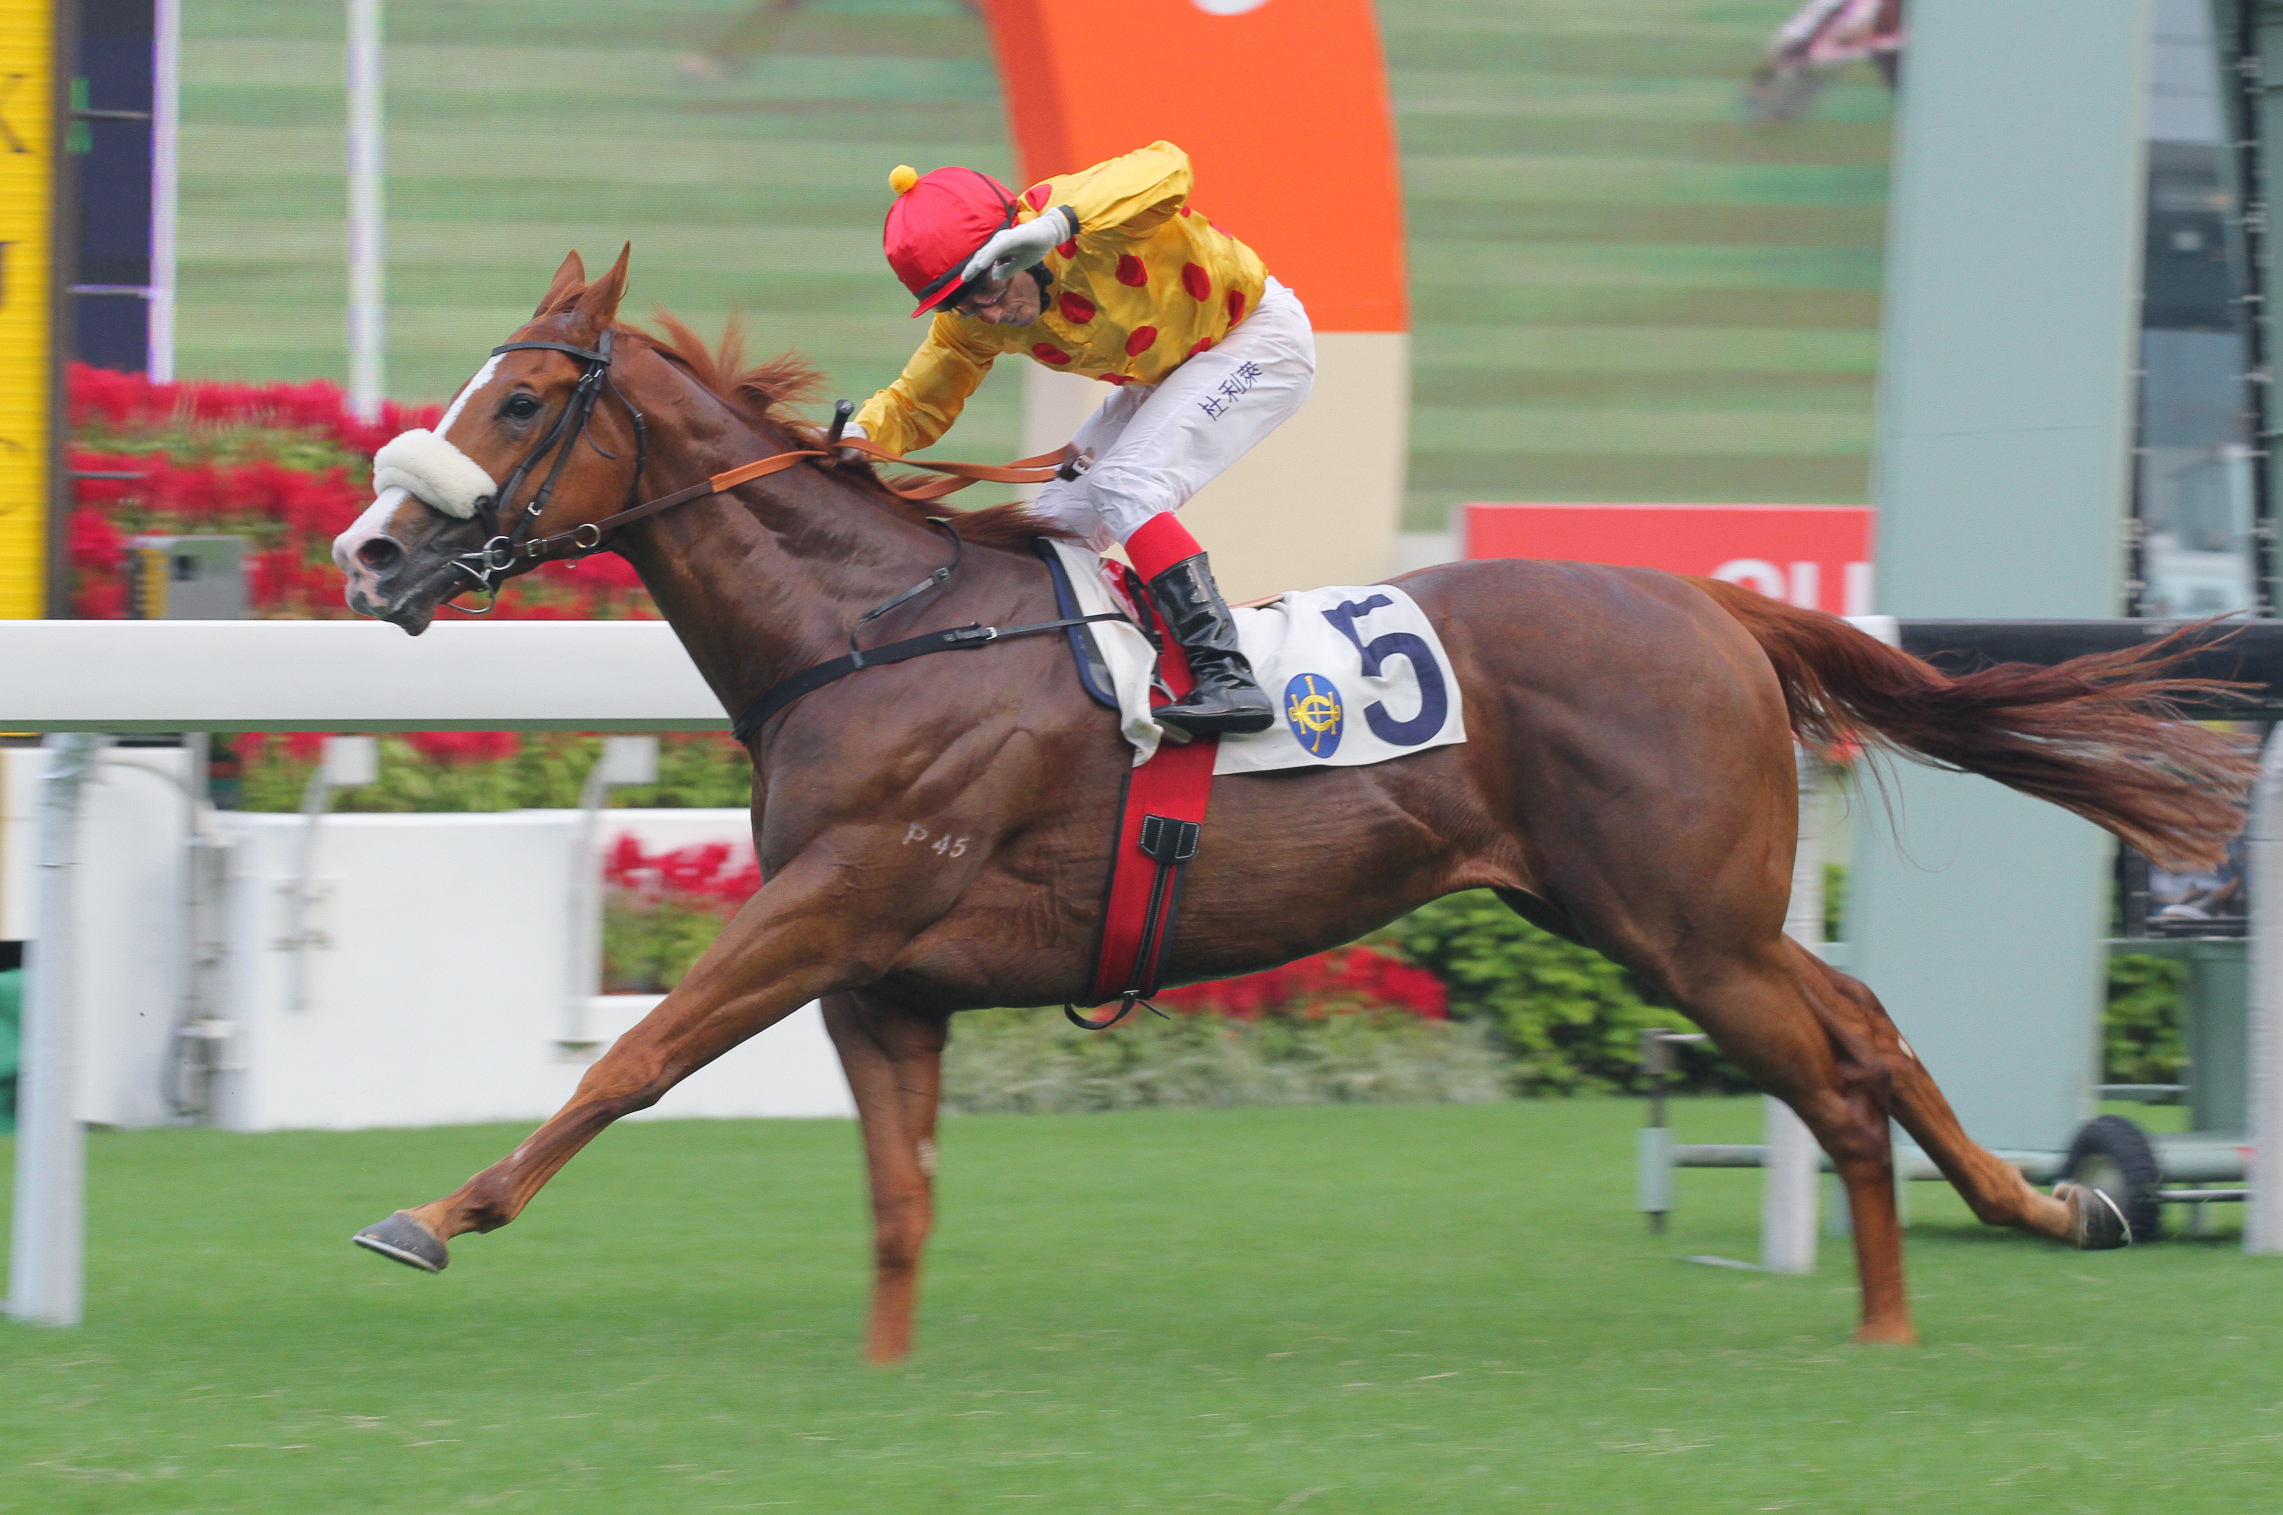 Gold-Fun, ridden by Olivier Doleuze, wins the National Day Cup. Photo: Kenneth Chan